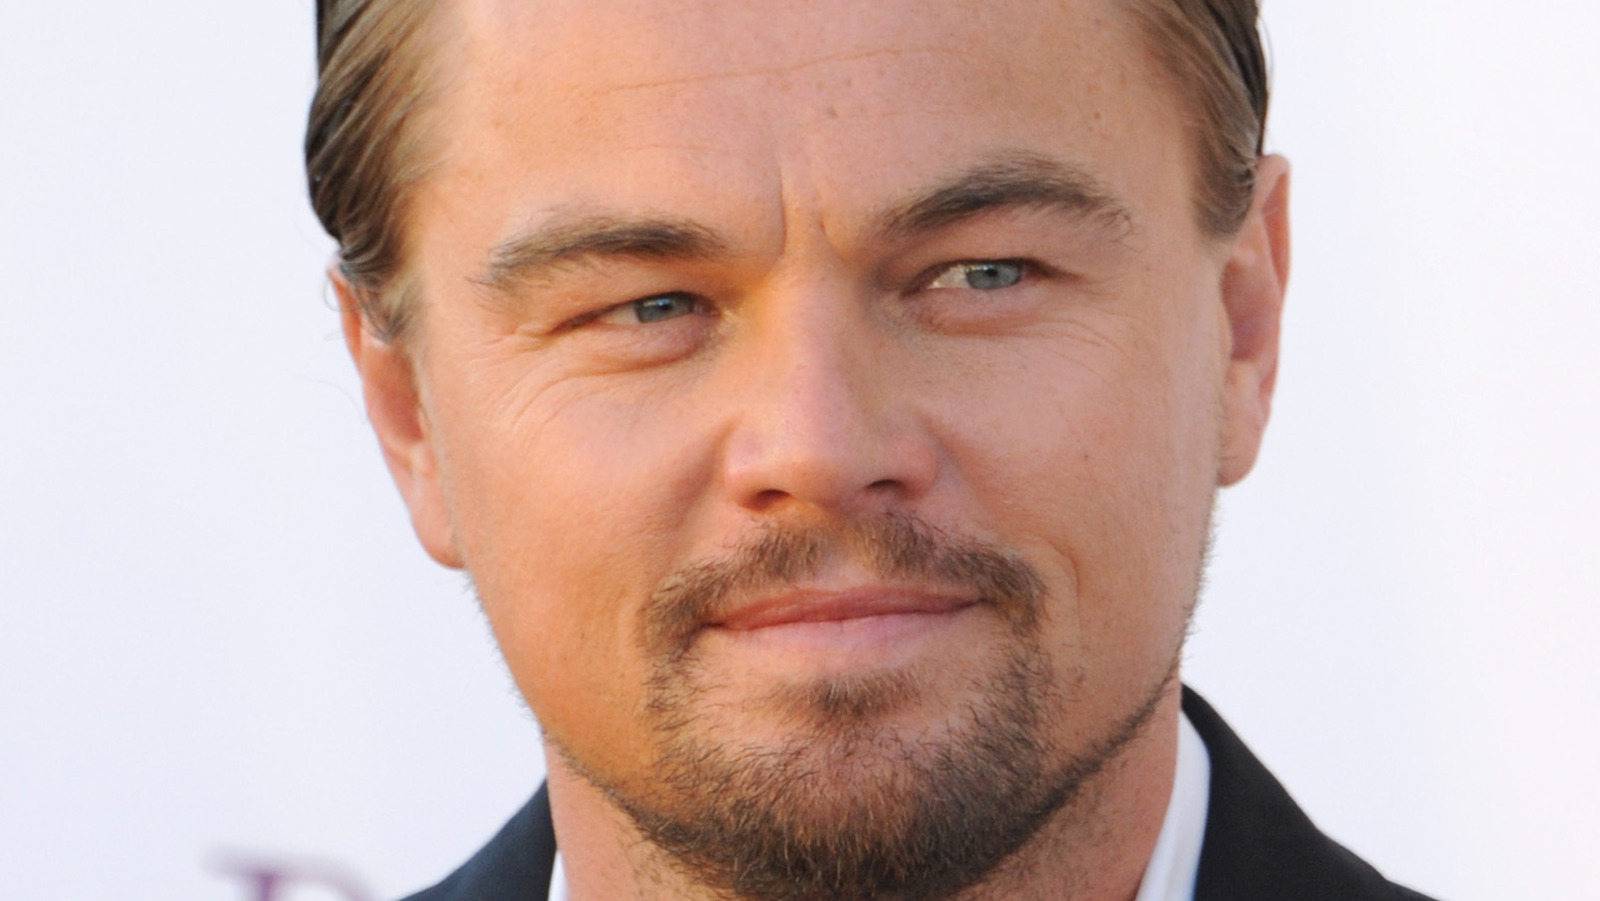 Why Leonardo DiCaprio Is Irresistible According To His Birth Chart